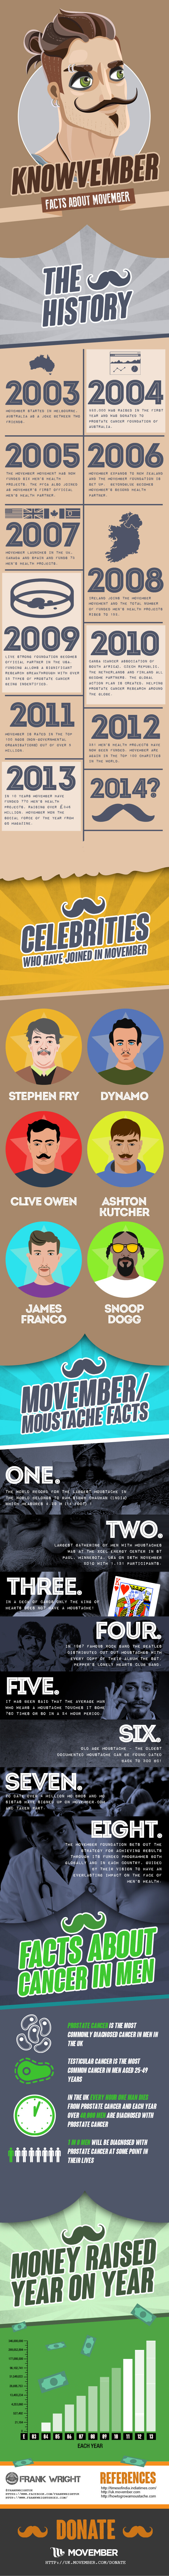  Knowvember – A Movember Fact Infographic 